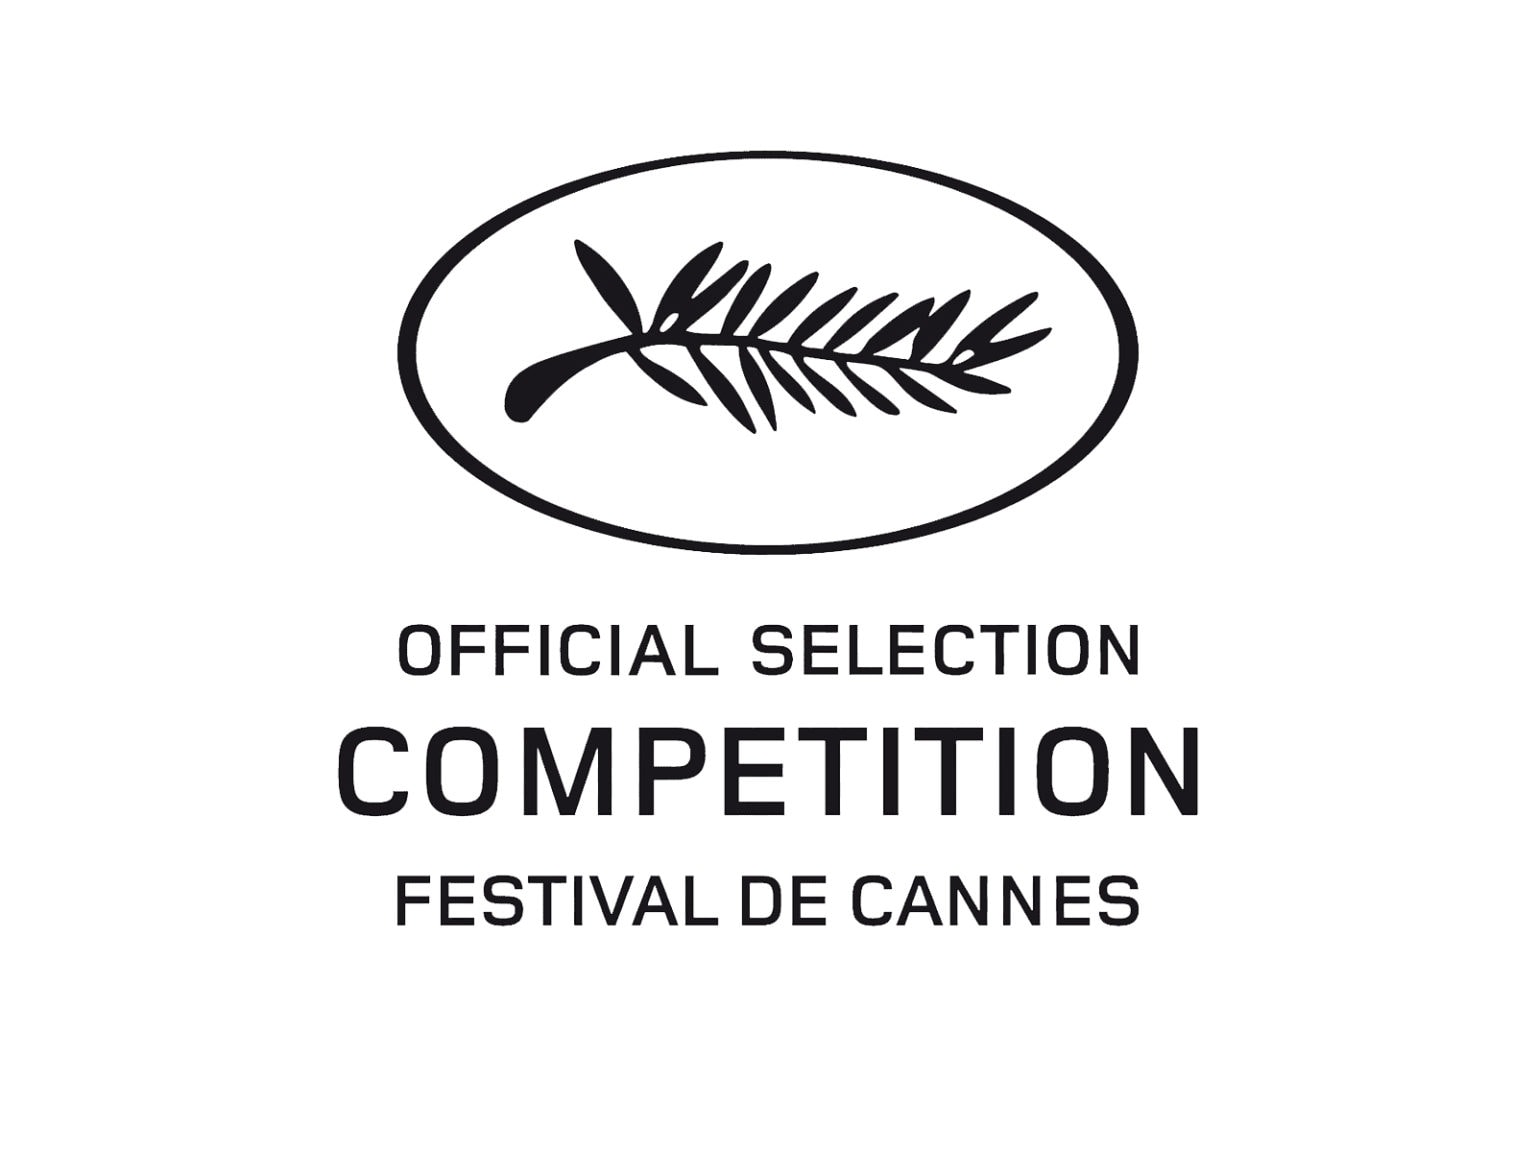 Additions to the Official Selection of the 74th Festival de Cannes